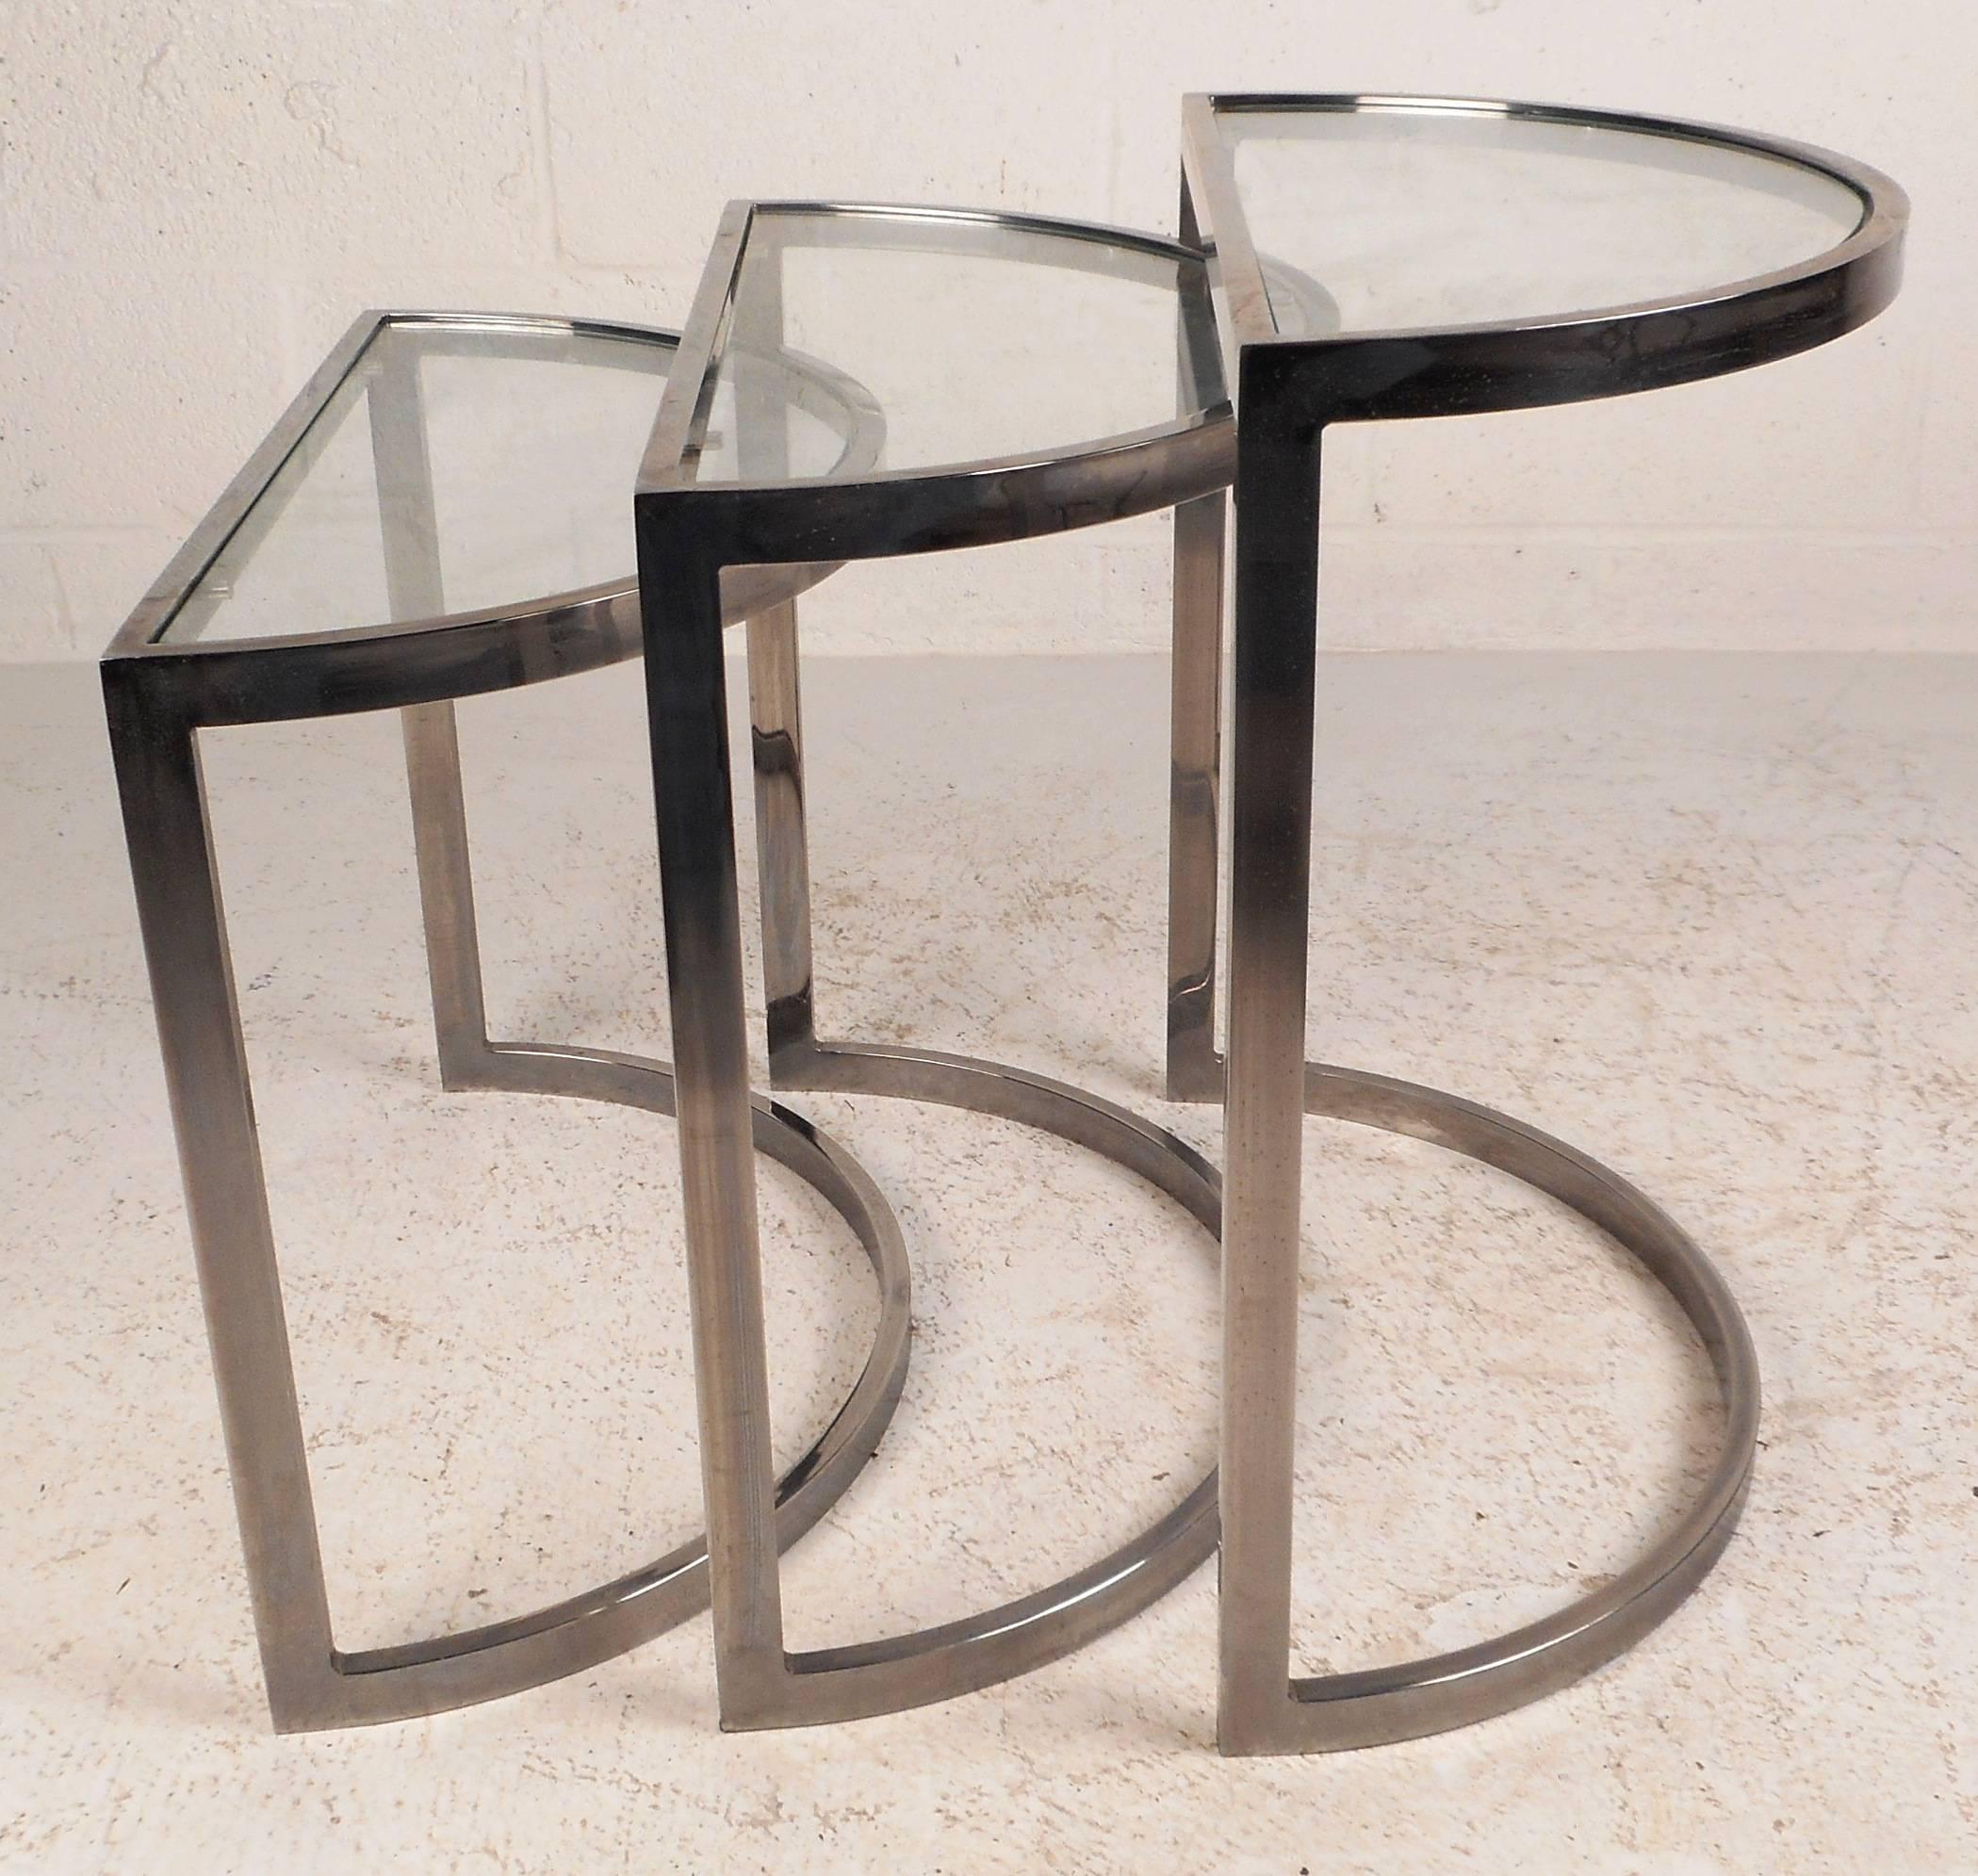 American Mid-Century Modern Chrome Nesting Tables in the Style of Metropolitan Furniture